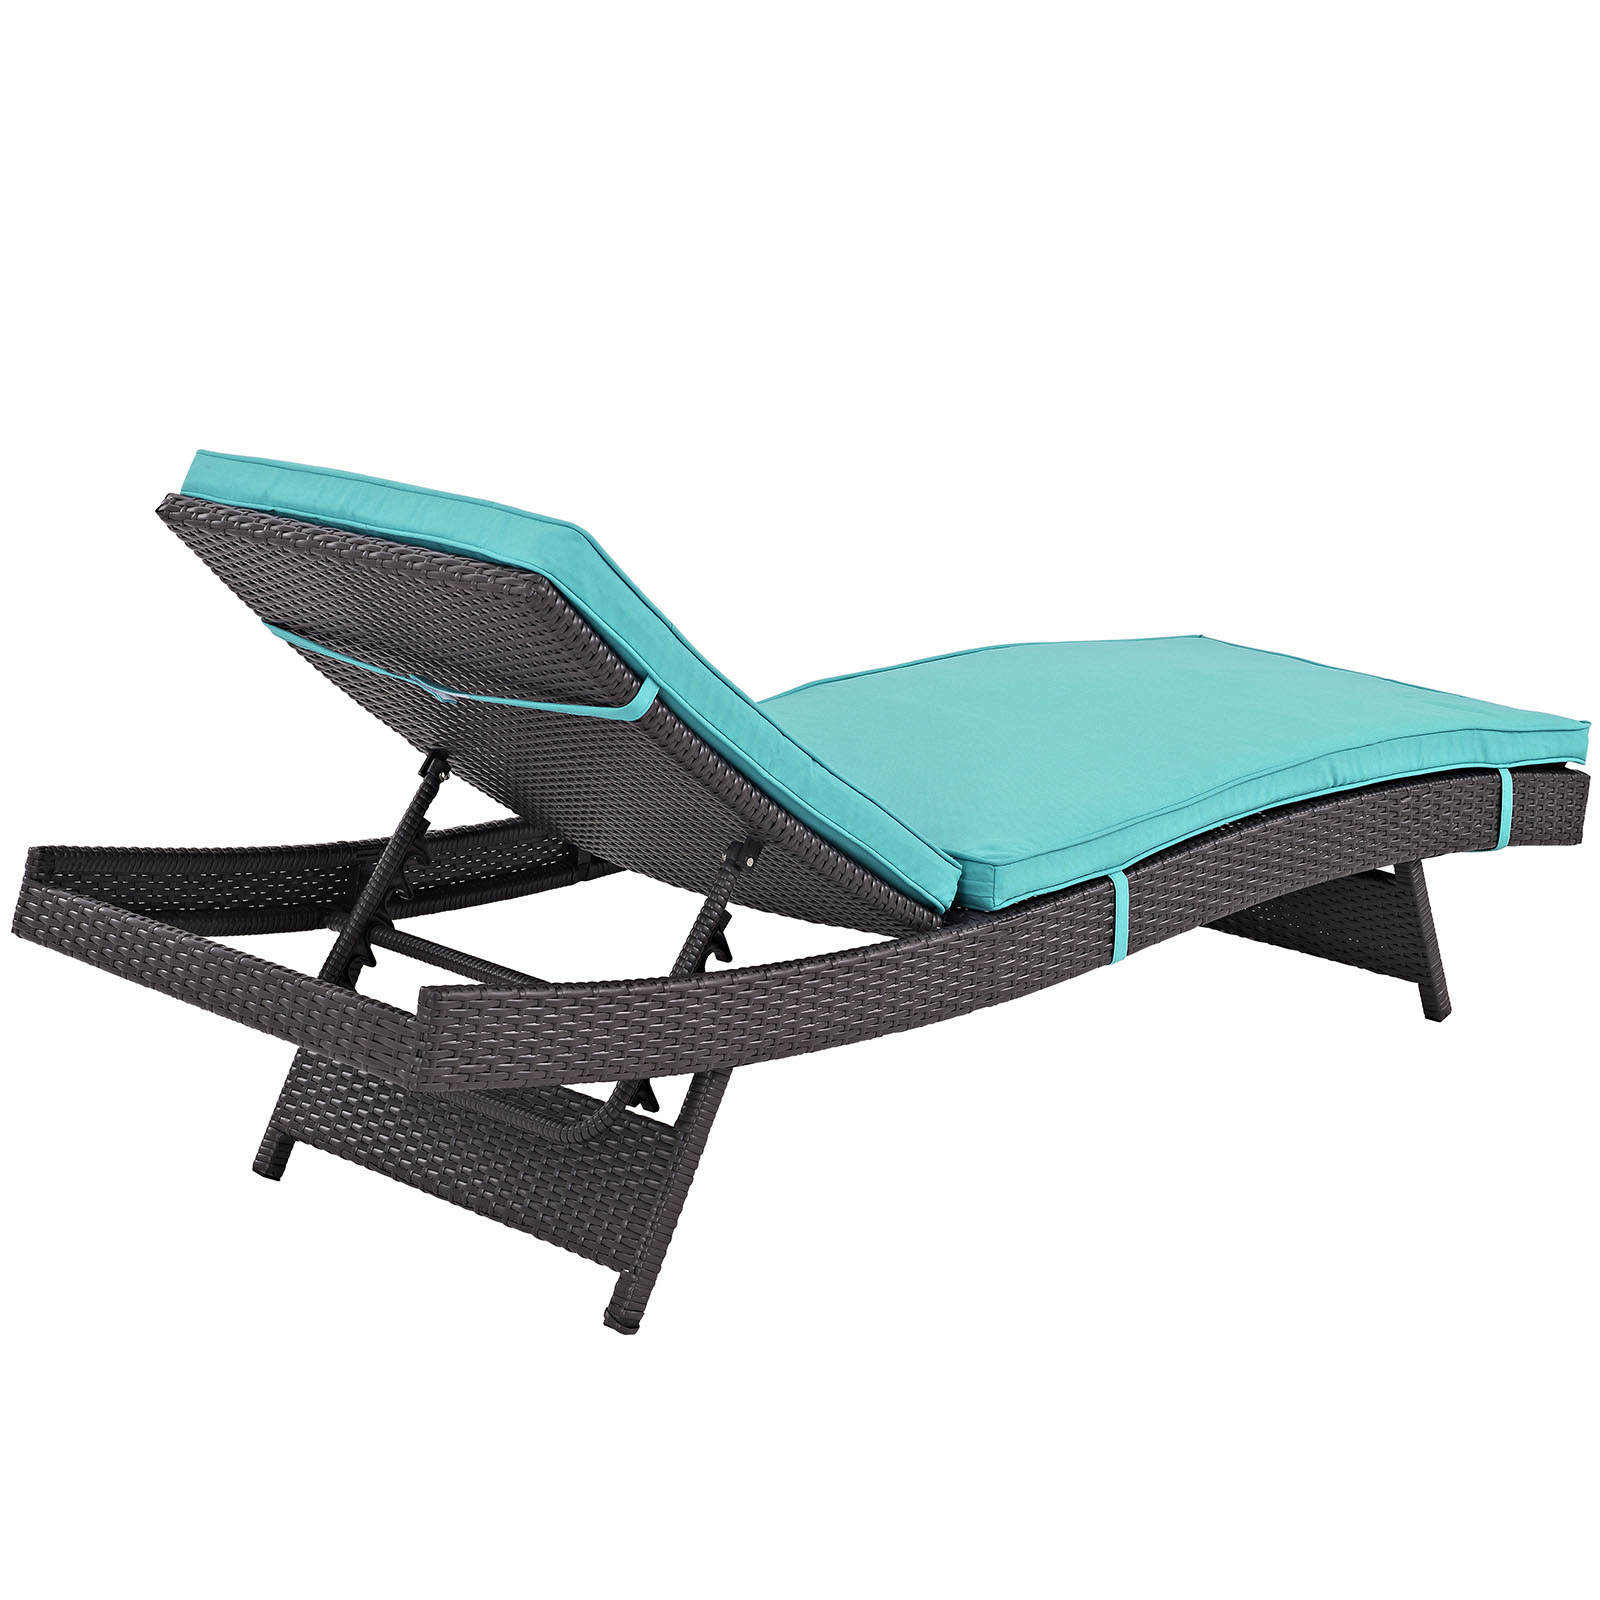 Modway Convene Chaise Outdoor Patio Set of 4 in Espresso Turquoise - image 5 of 5